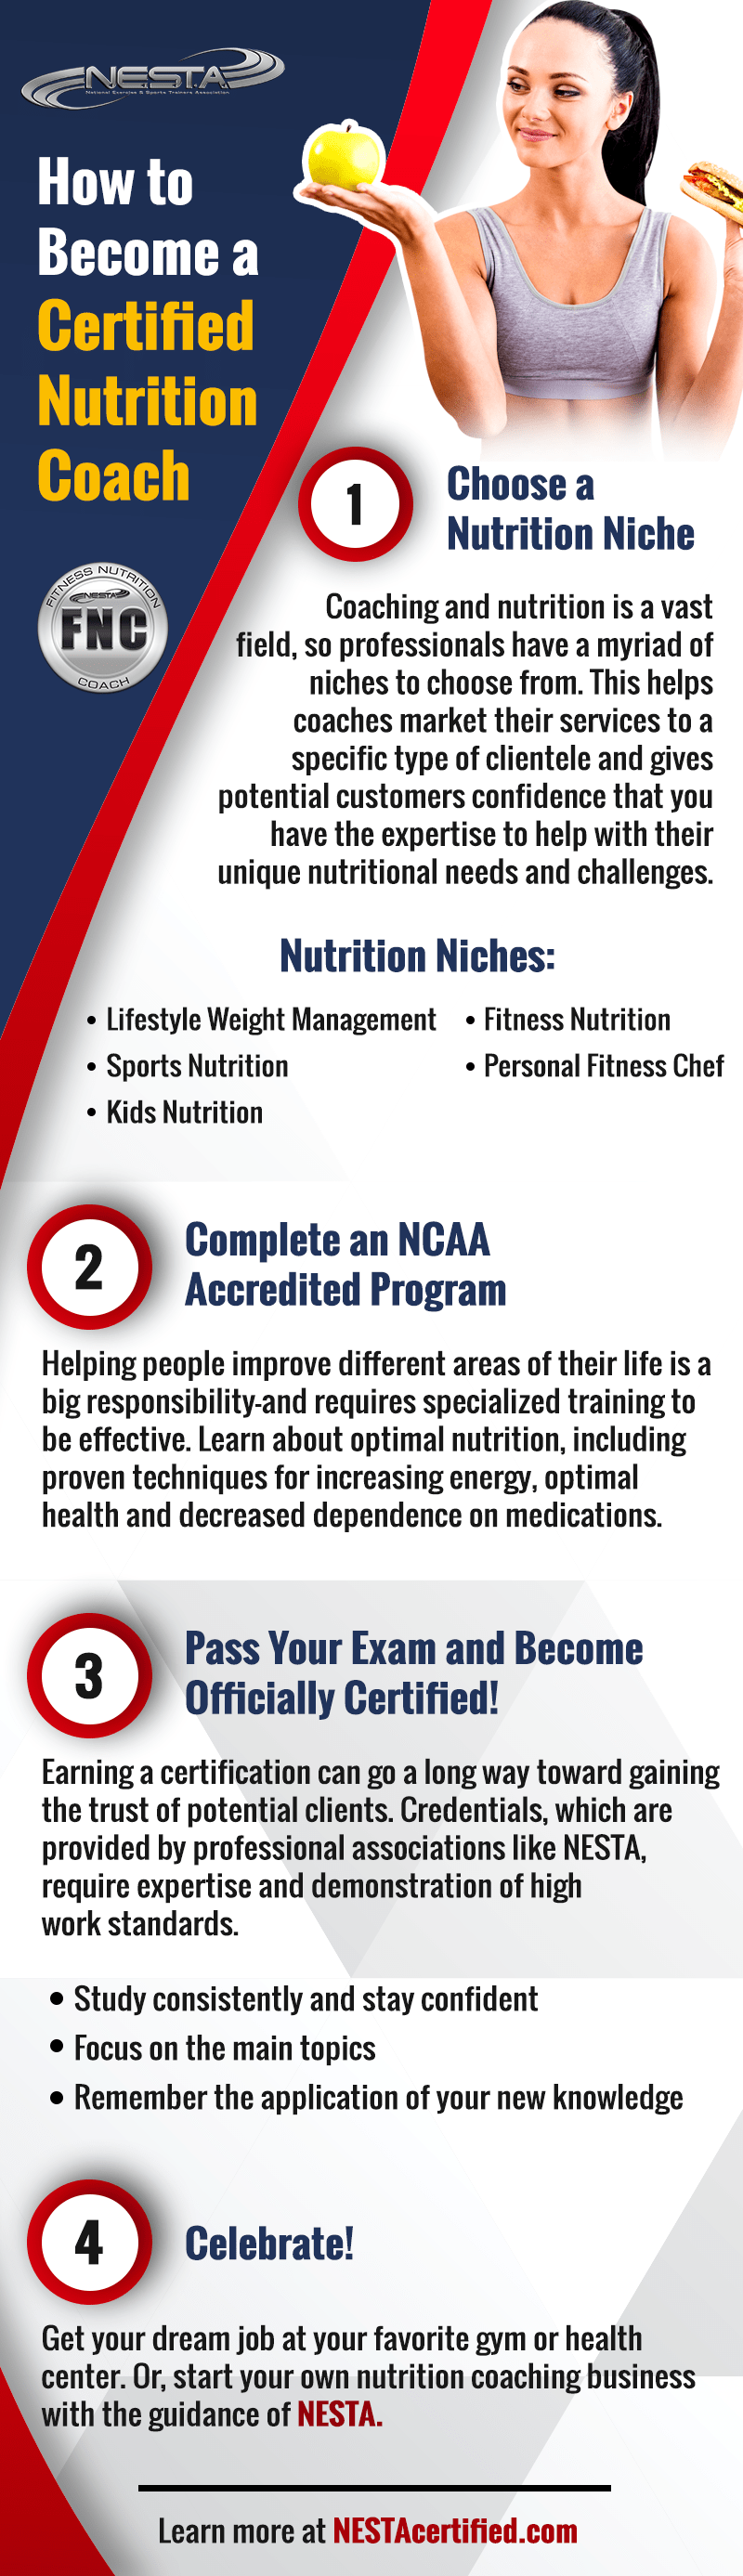 How to Become a Certified Nutrition Coach with an Online Course from NESTAcertified.com